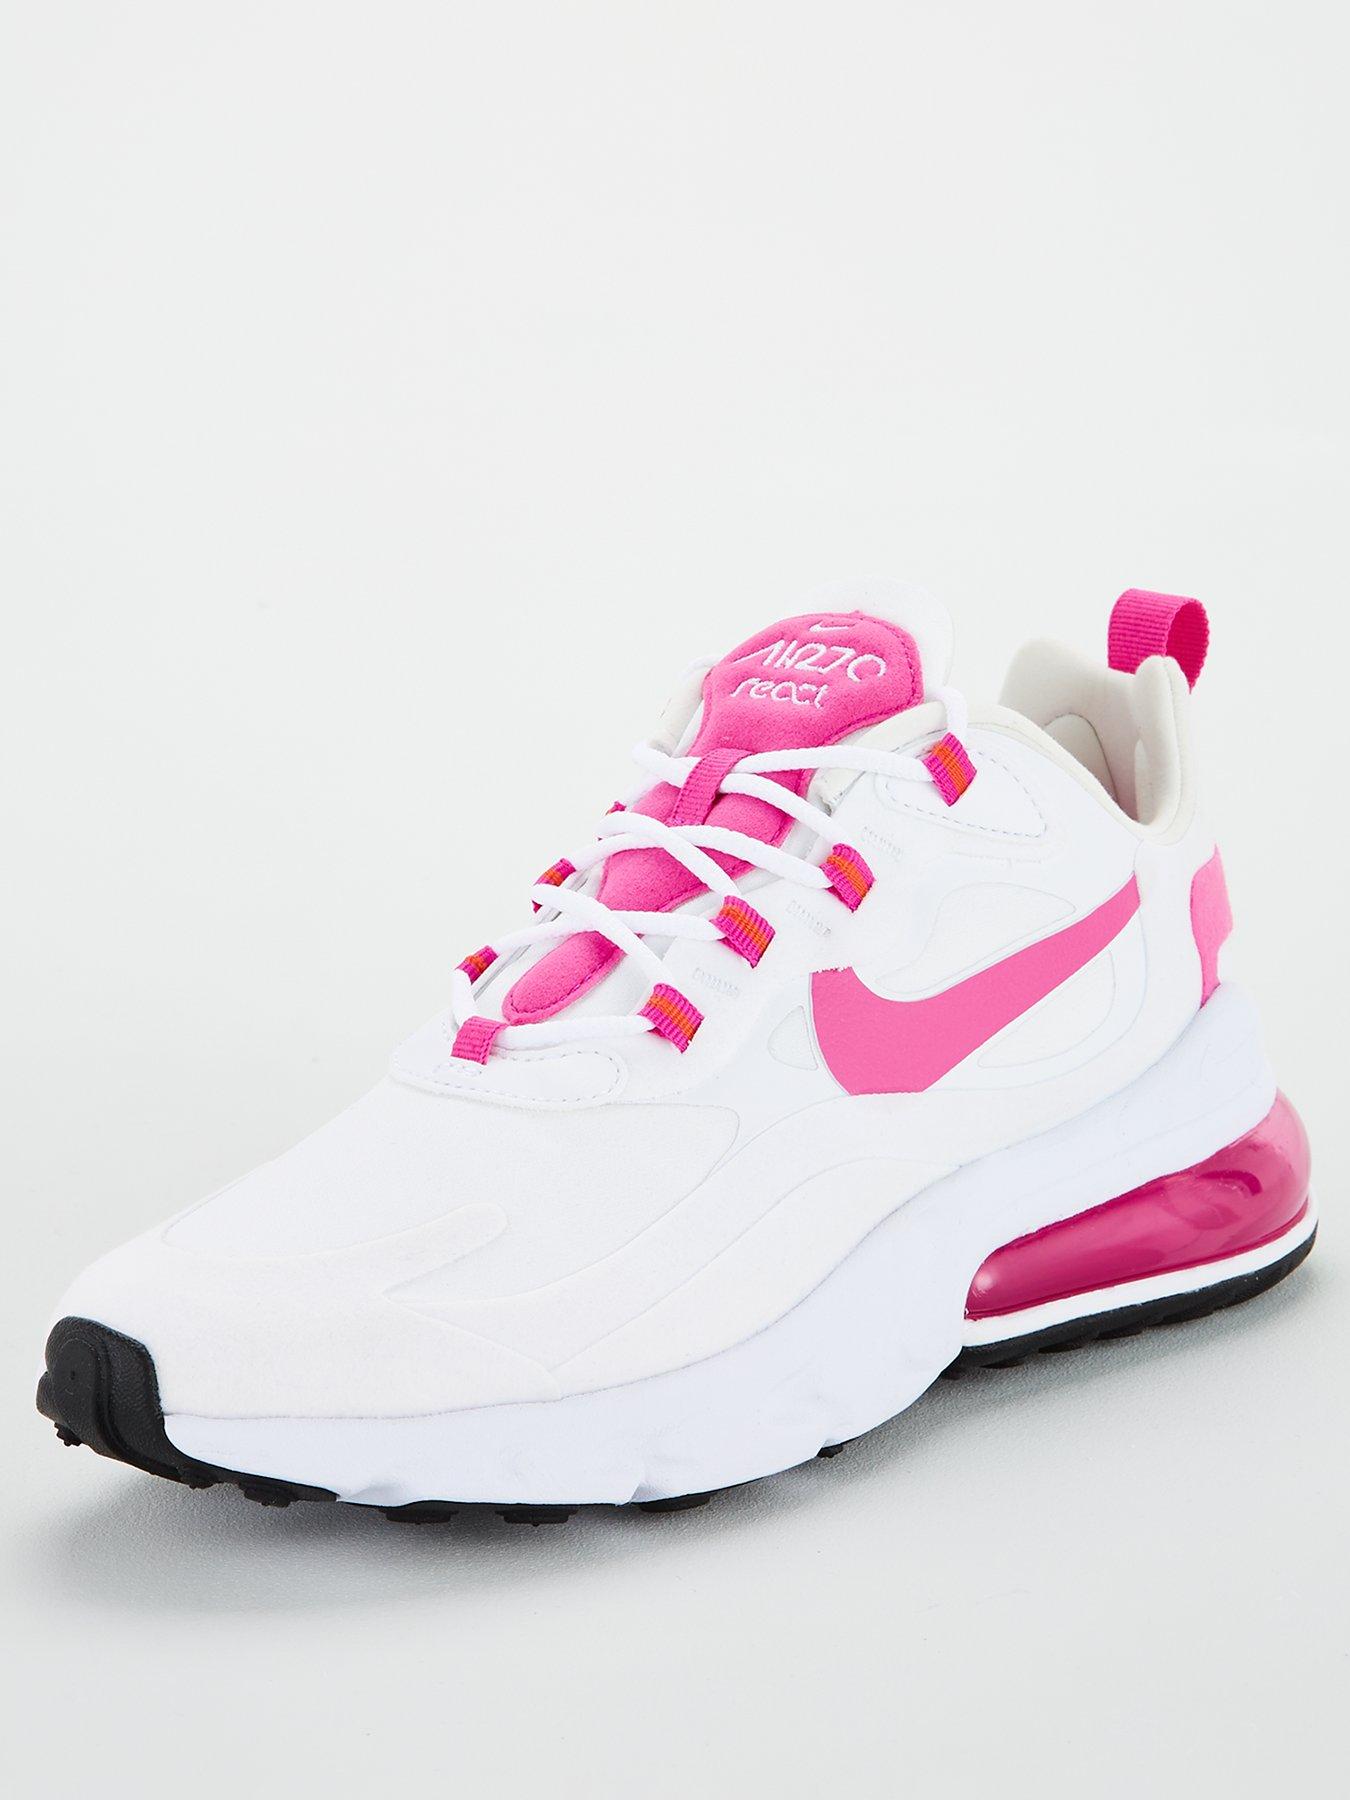 white and pink 270s